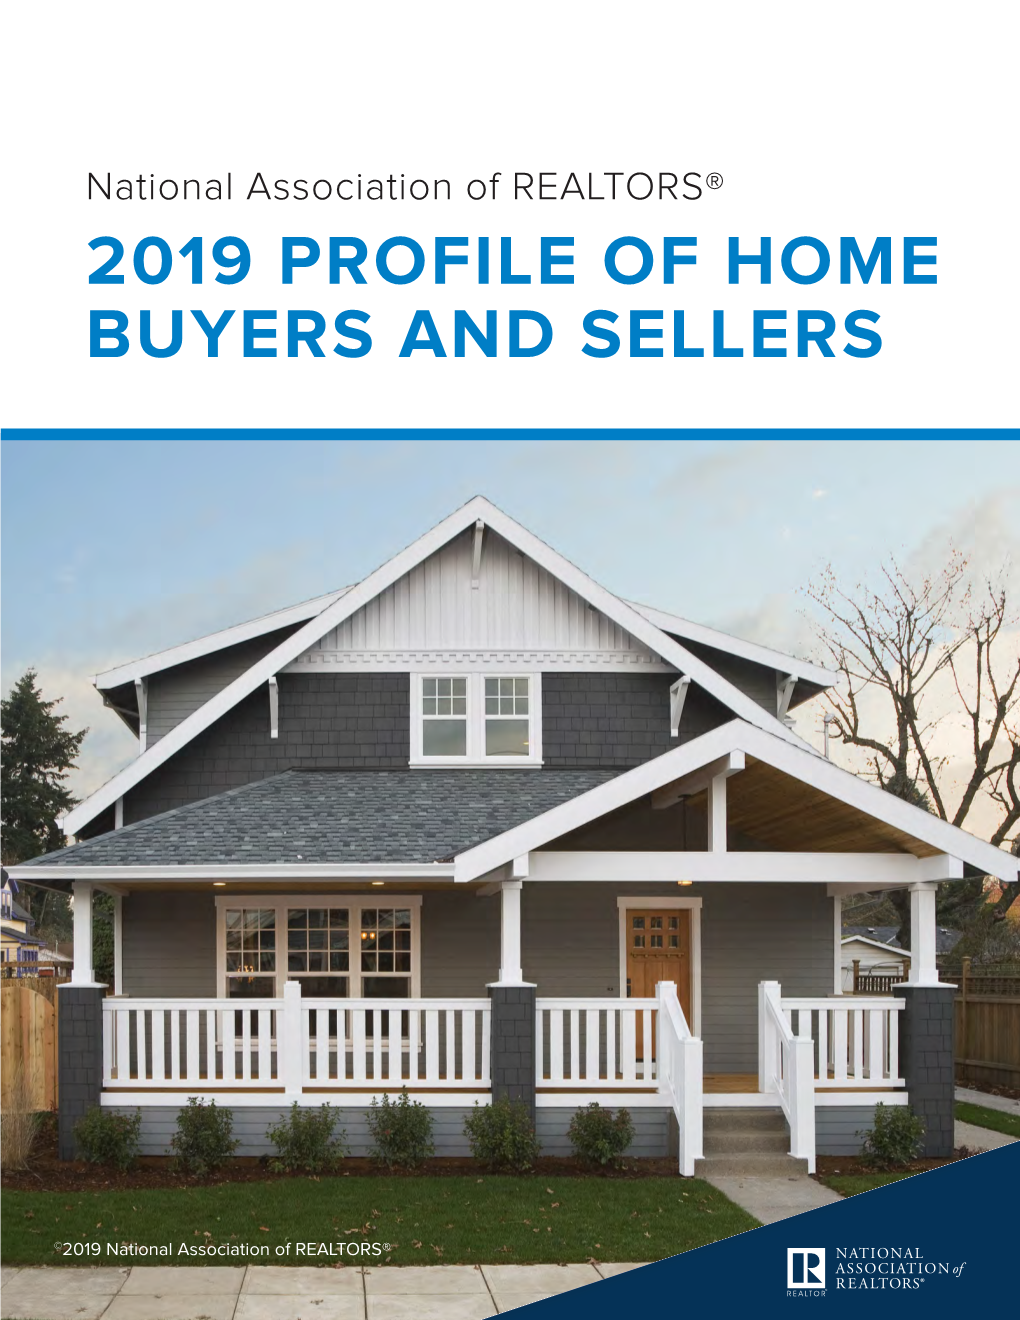 NAR's 2019 Profile of Home Buyers and Sellers